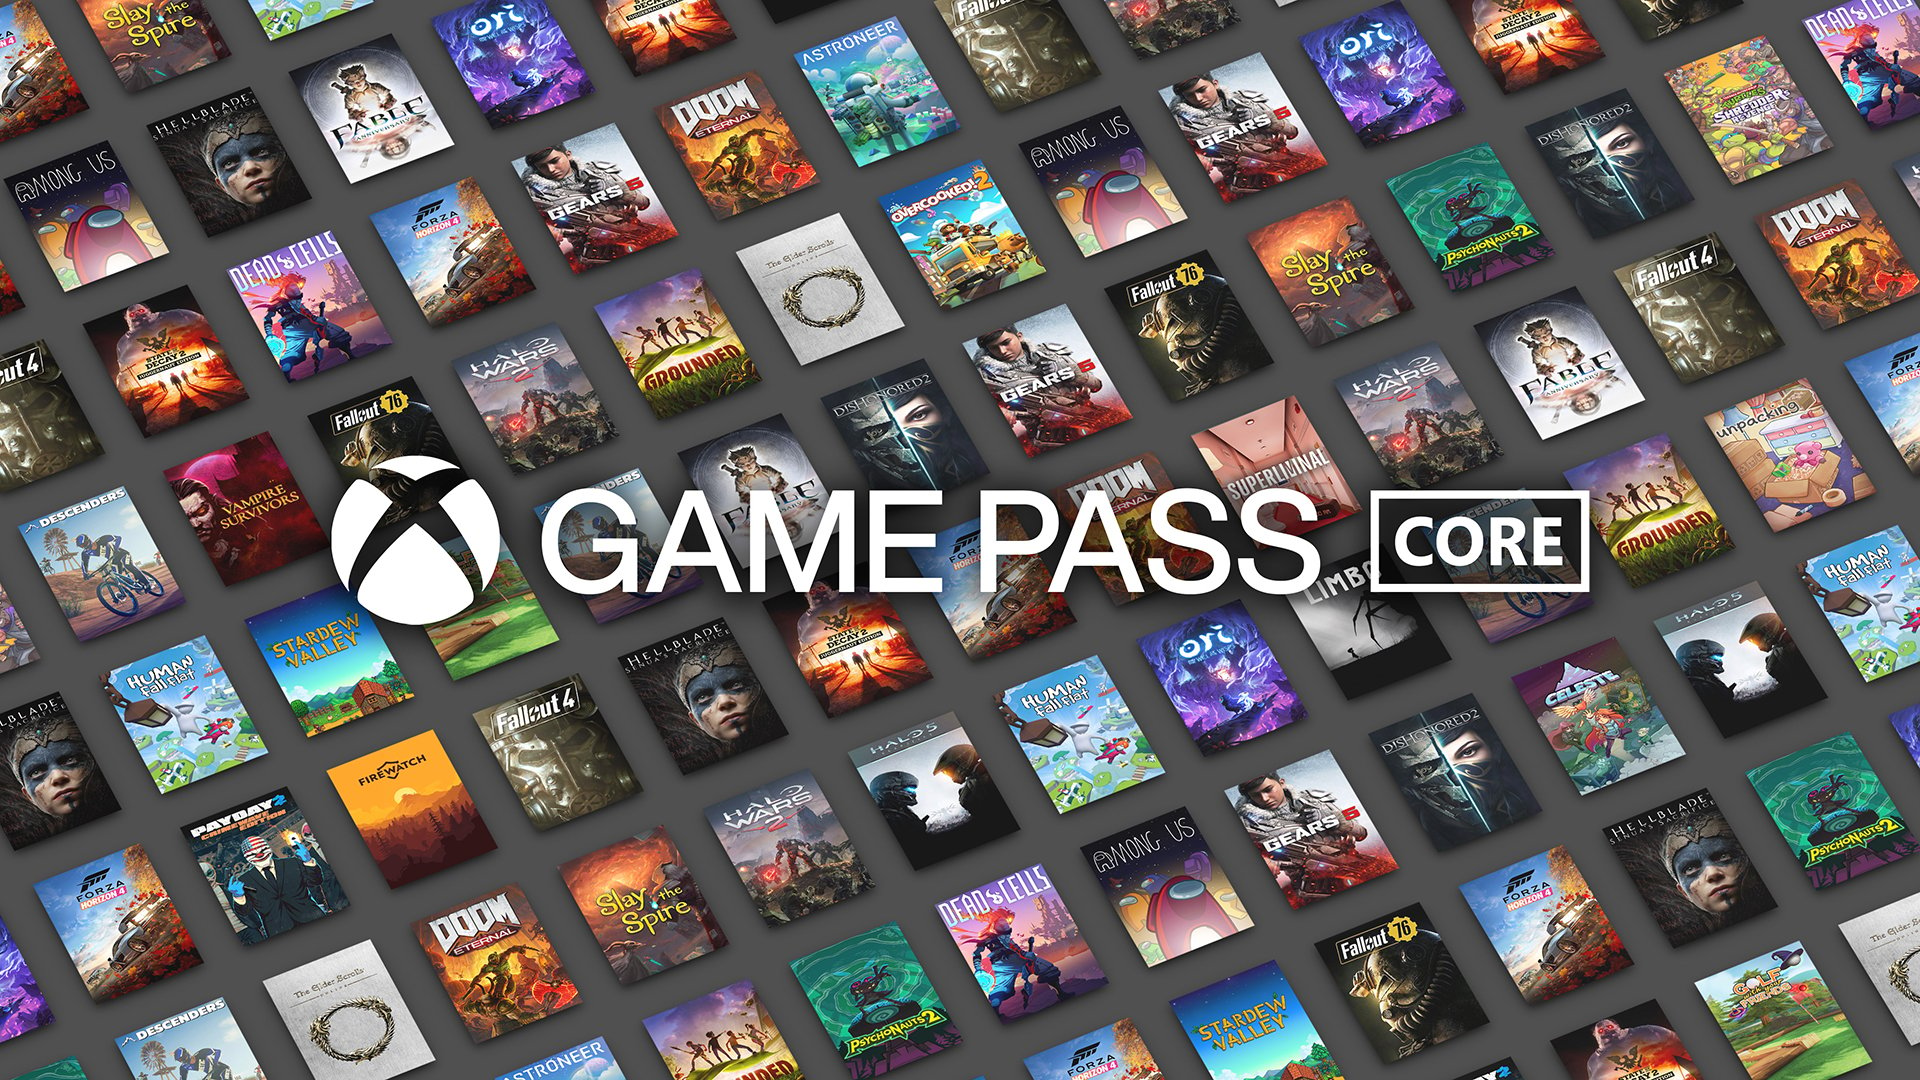 Xbox PC Game Pass launches in 40 new countries